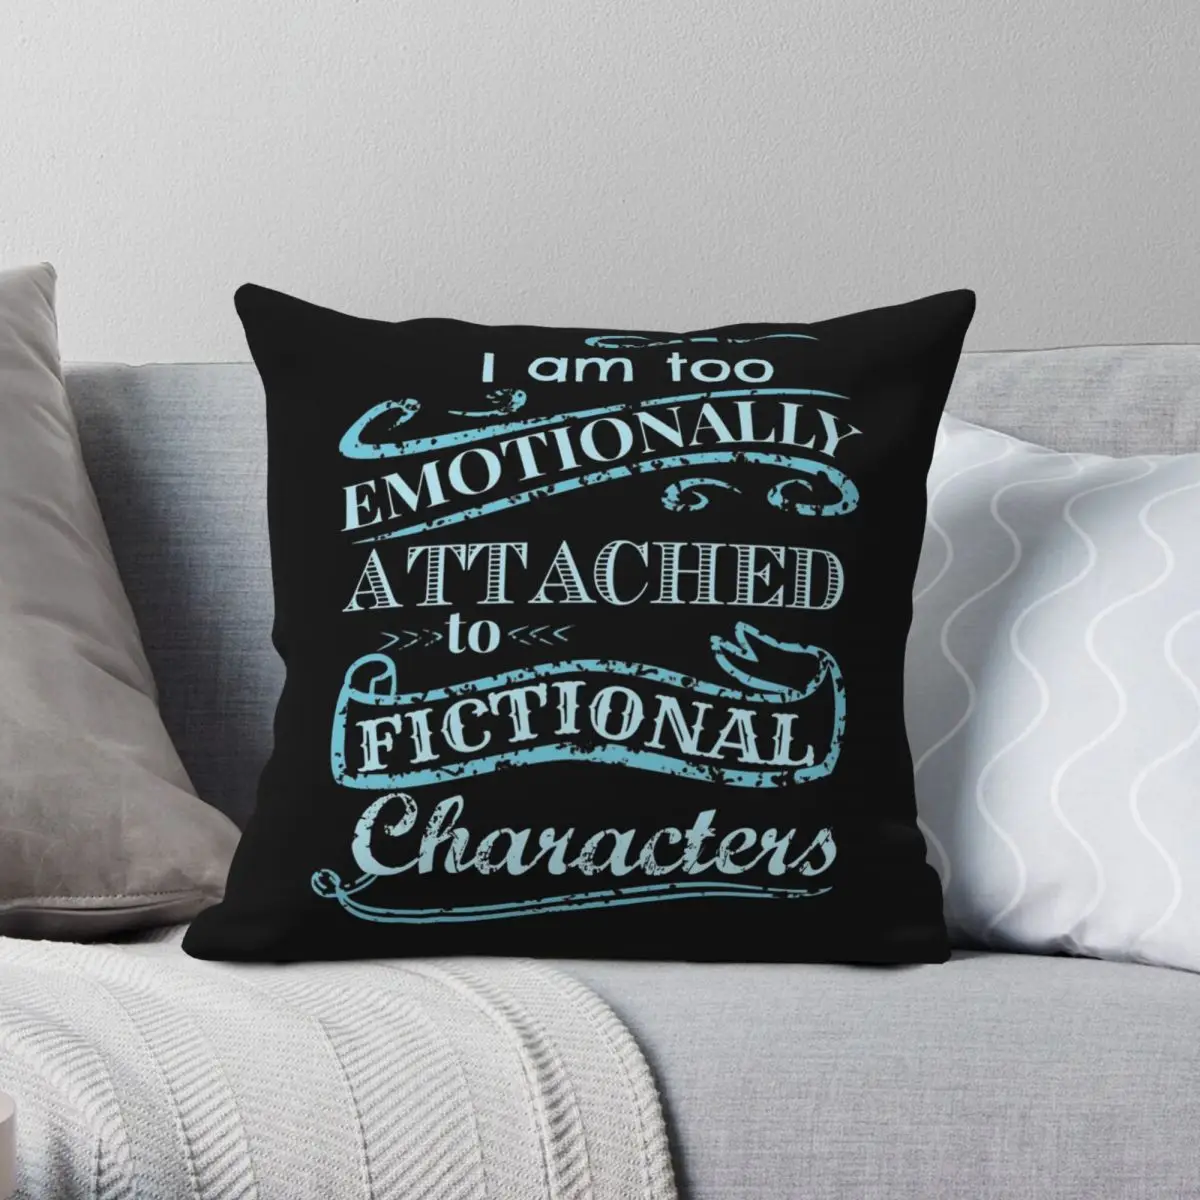 

Too Emotionally Attached To Fictional Character Pillowcase Polyester Linen Velvet Pattern Decor Pillow Case Bed Cushion Cover